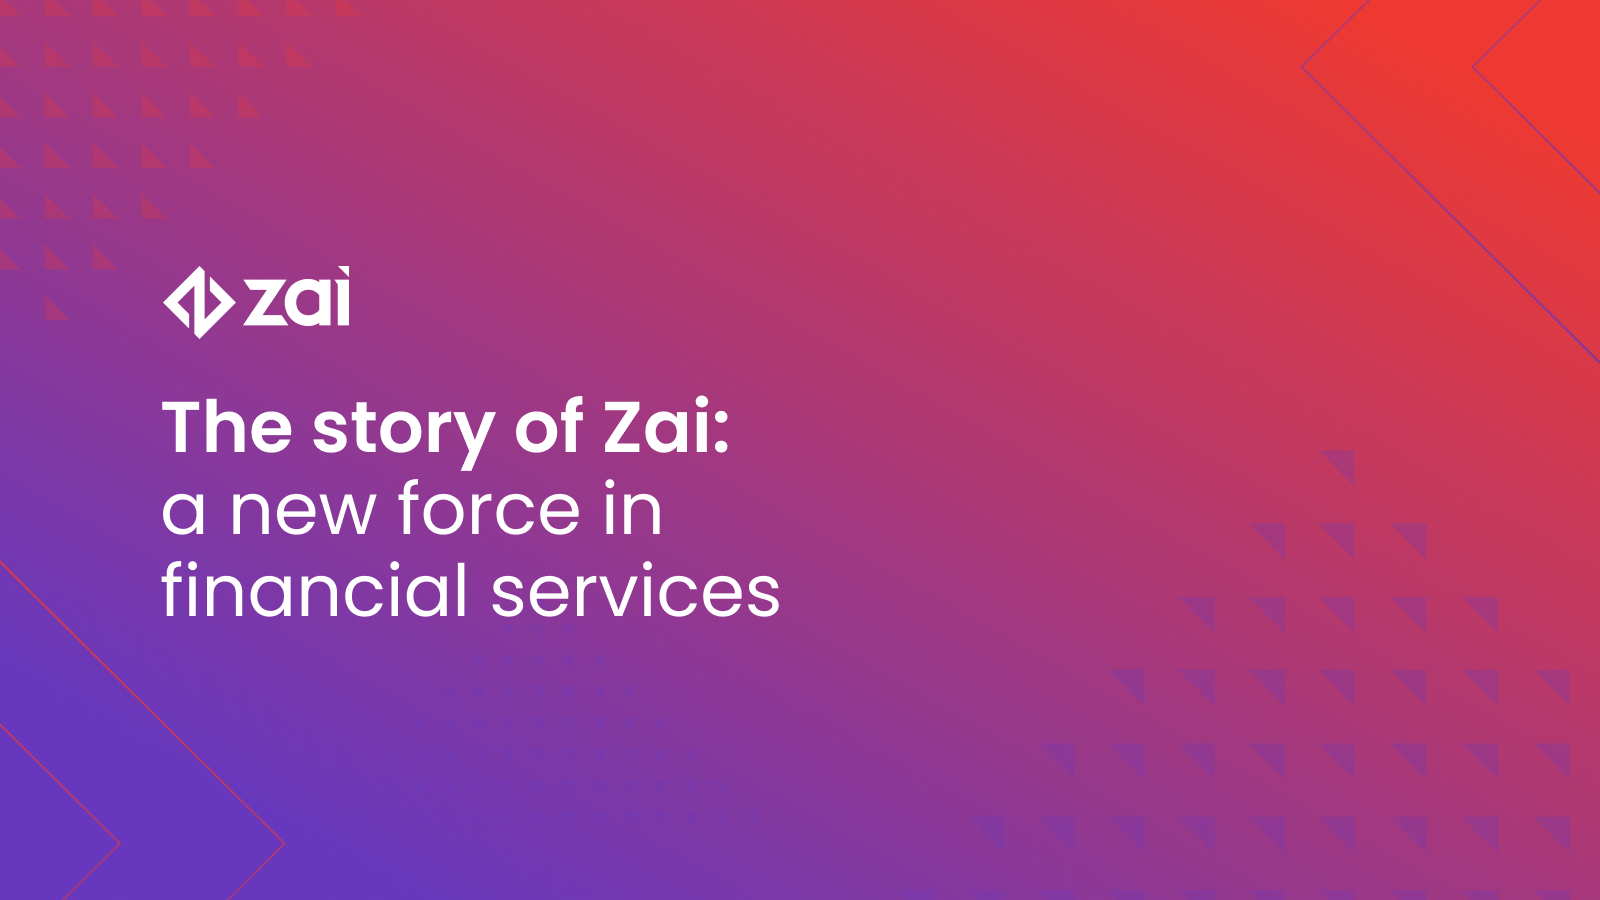 The story of Zai: a new force in financial services